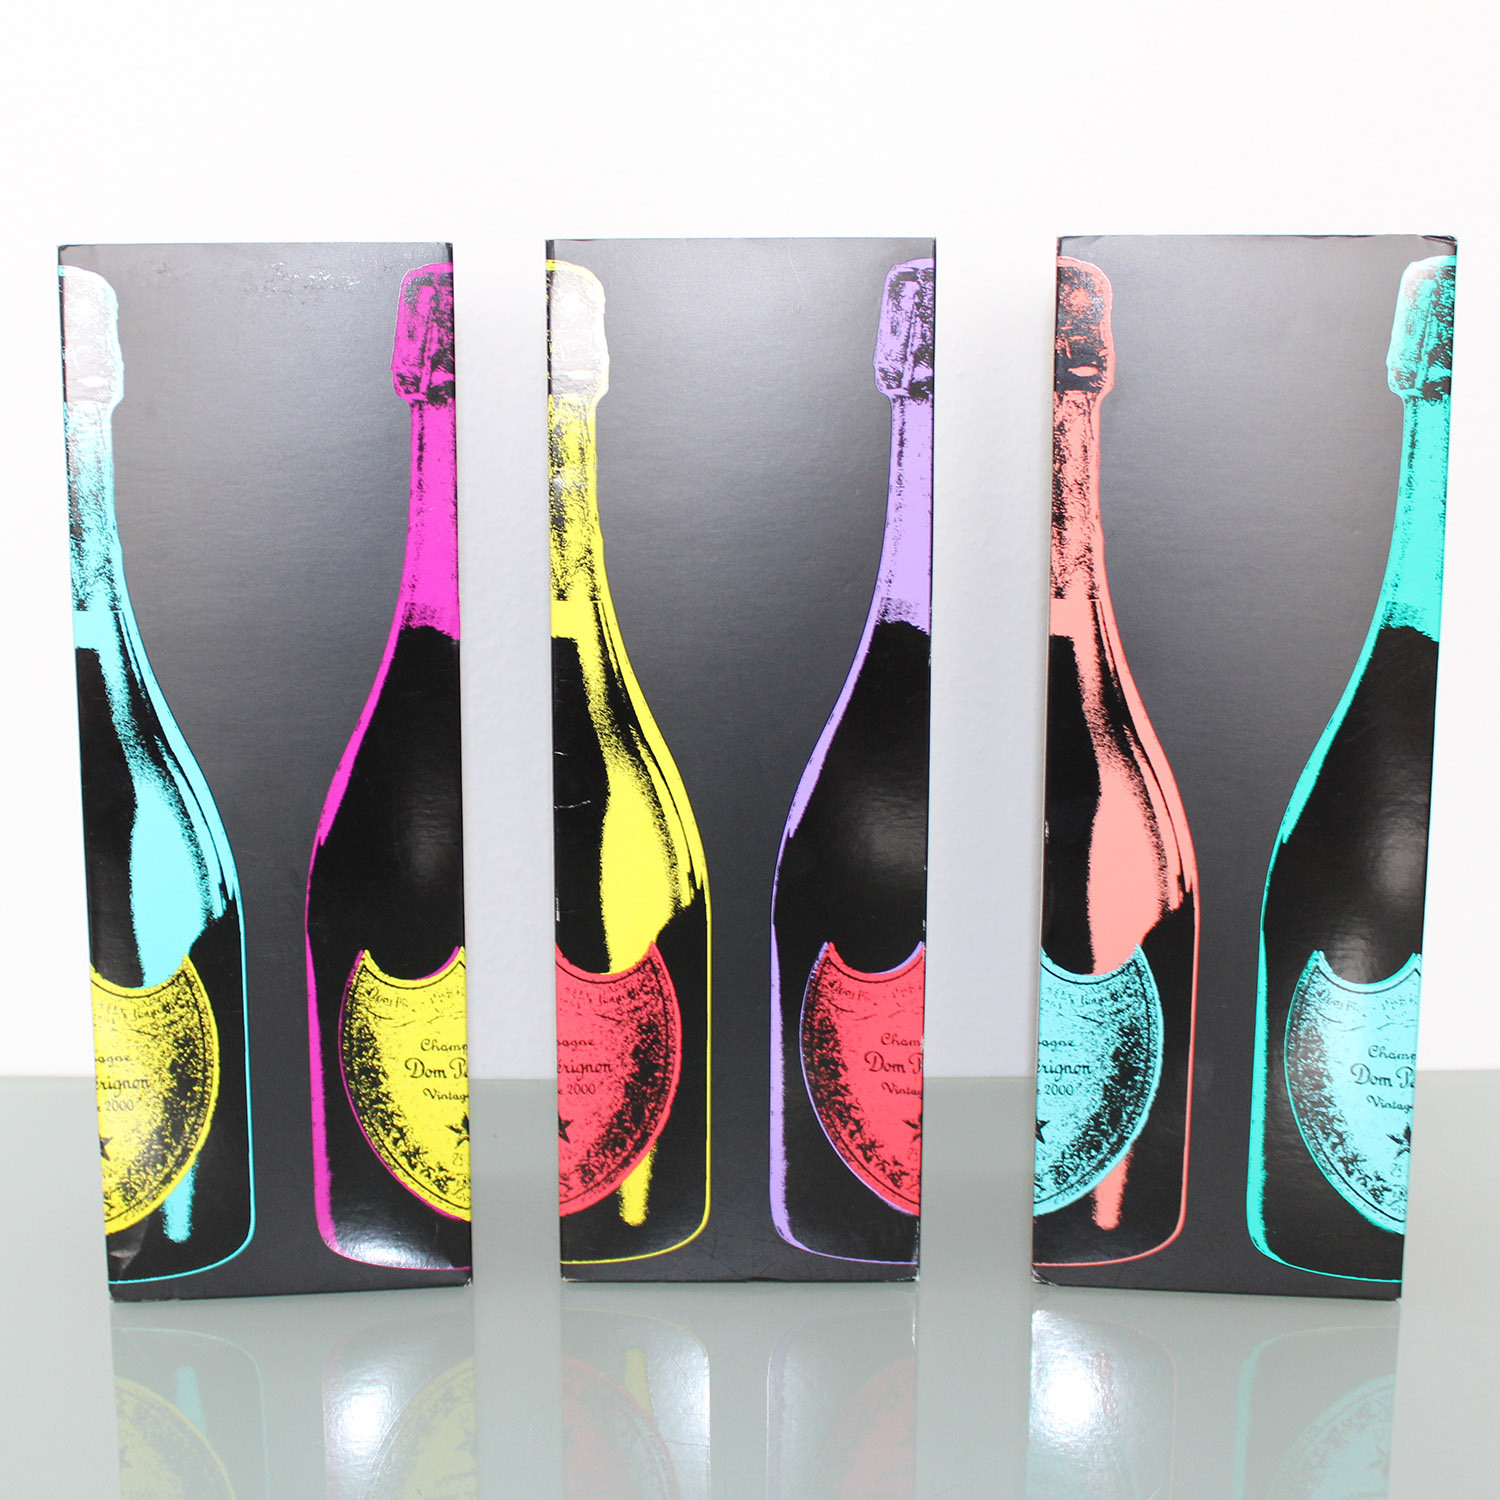 Dom Perignon 2000 Andy Warhol Champagner Collection Boxes 2